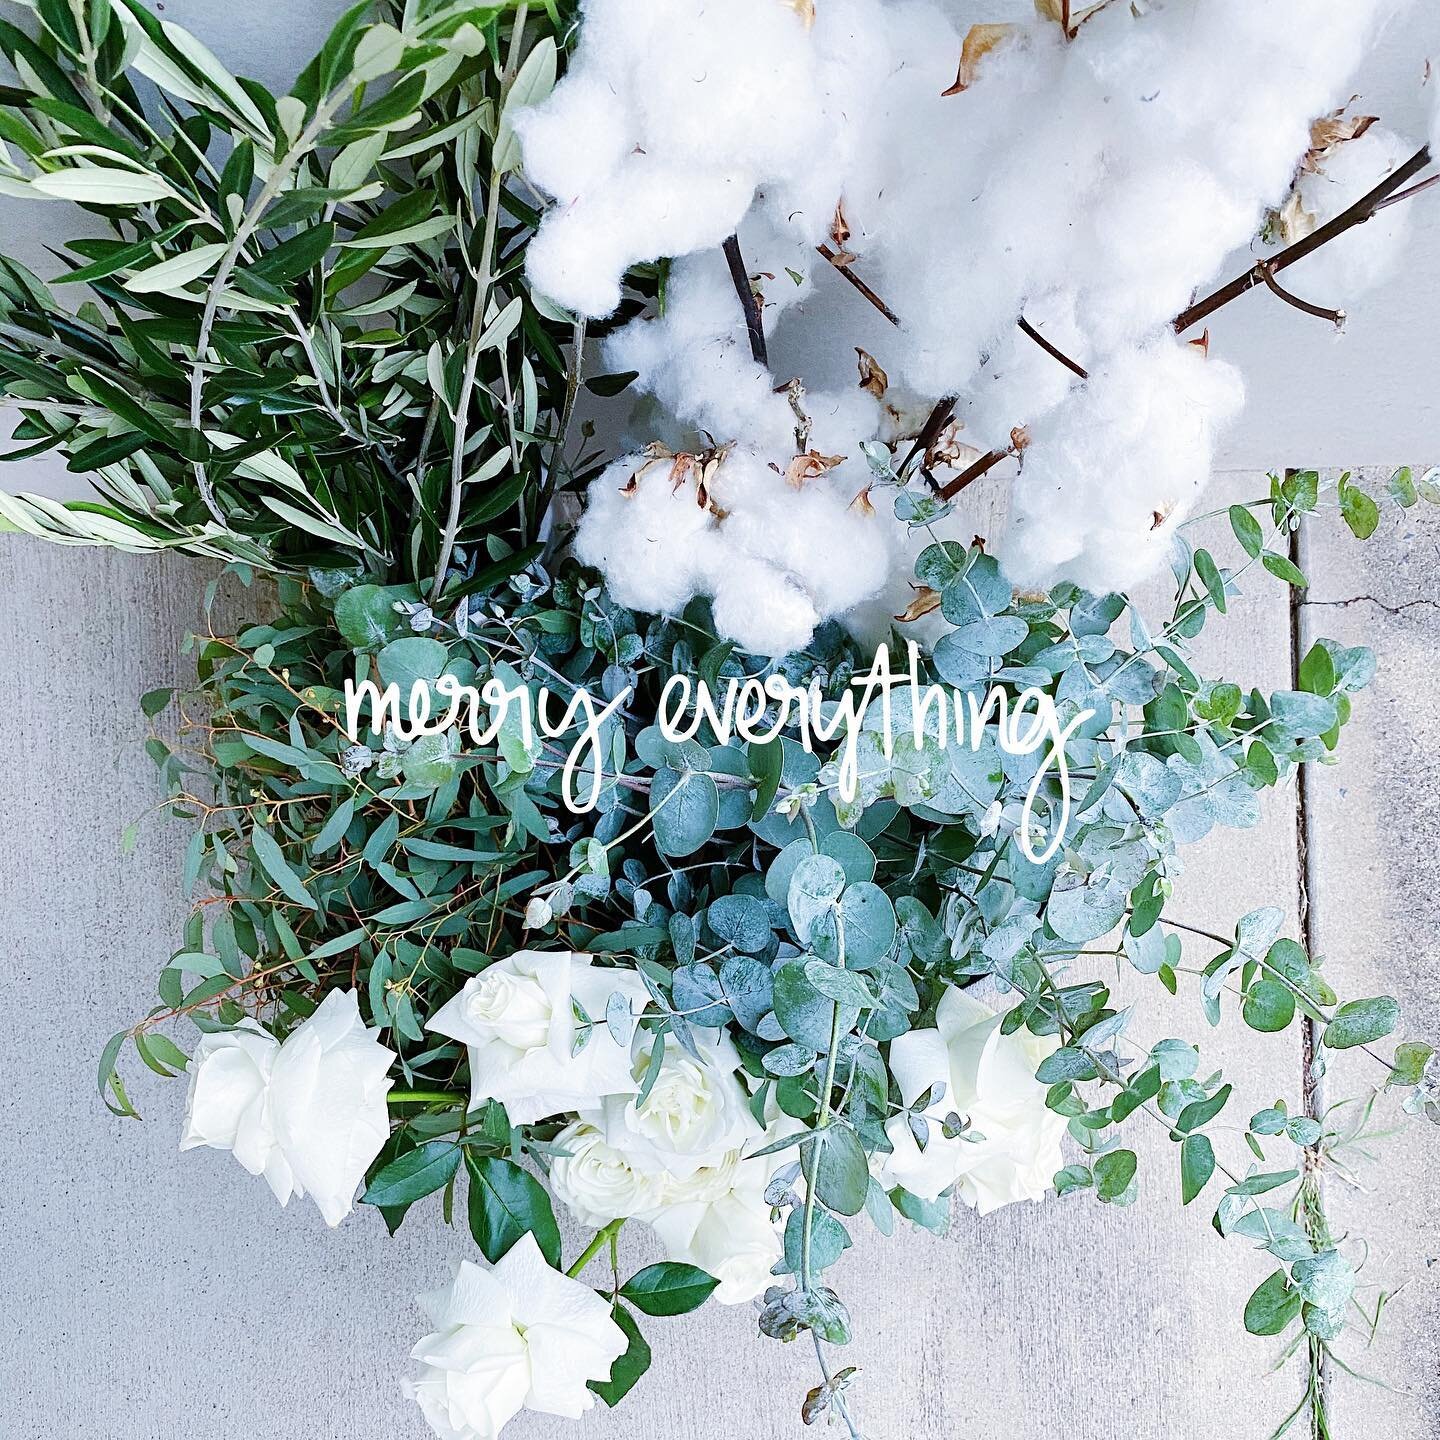 merry everything - with love from your boy timothy james x
#merrychristmas #mrtimothyjames